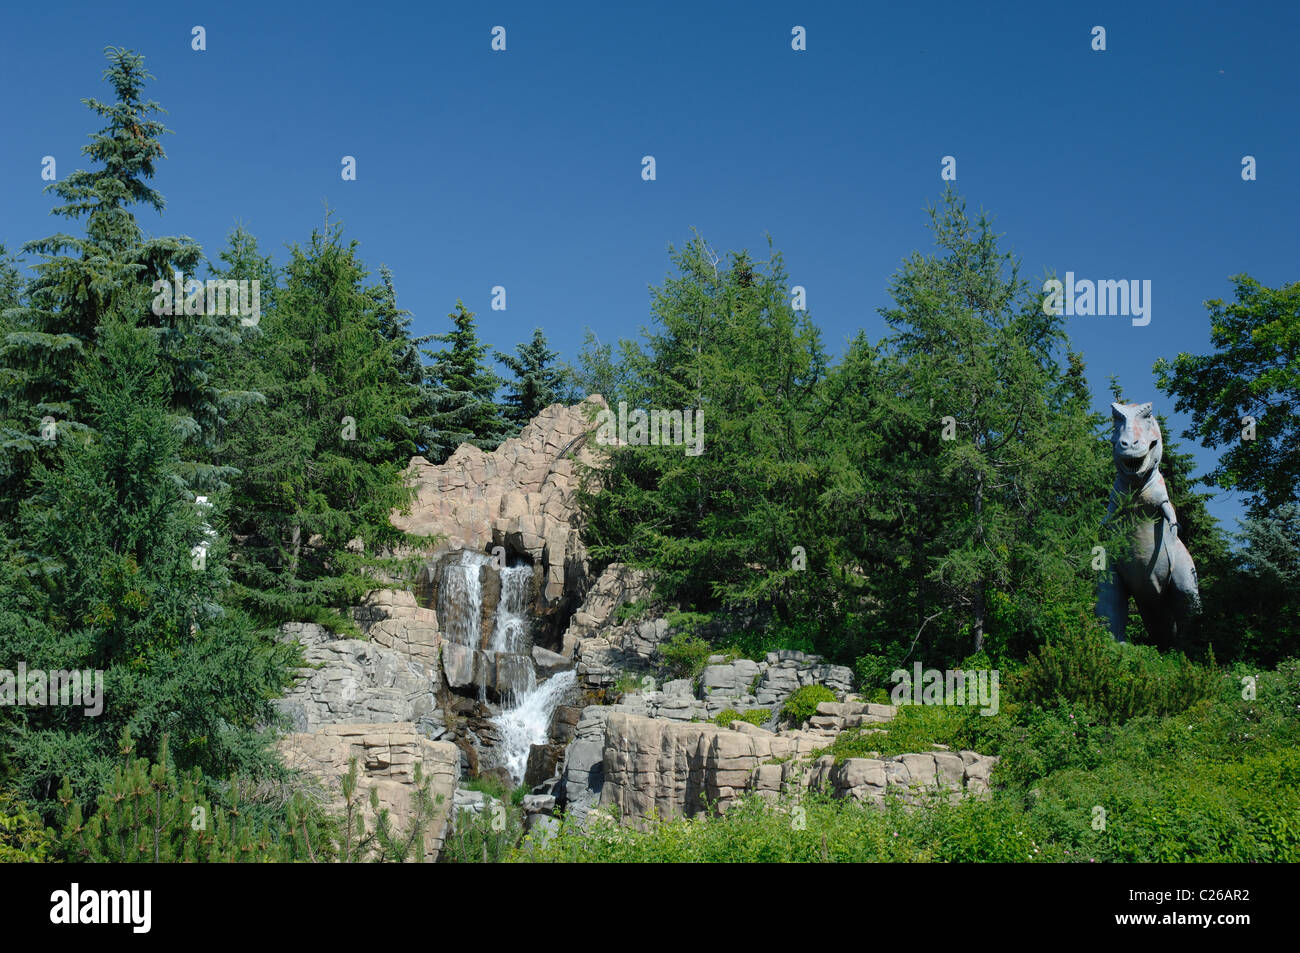 A scene of the Calgary Zoo prehistoric park with a tyrannosaurus rex and waterfall. Stock Photo